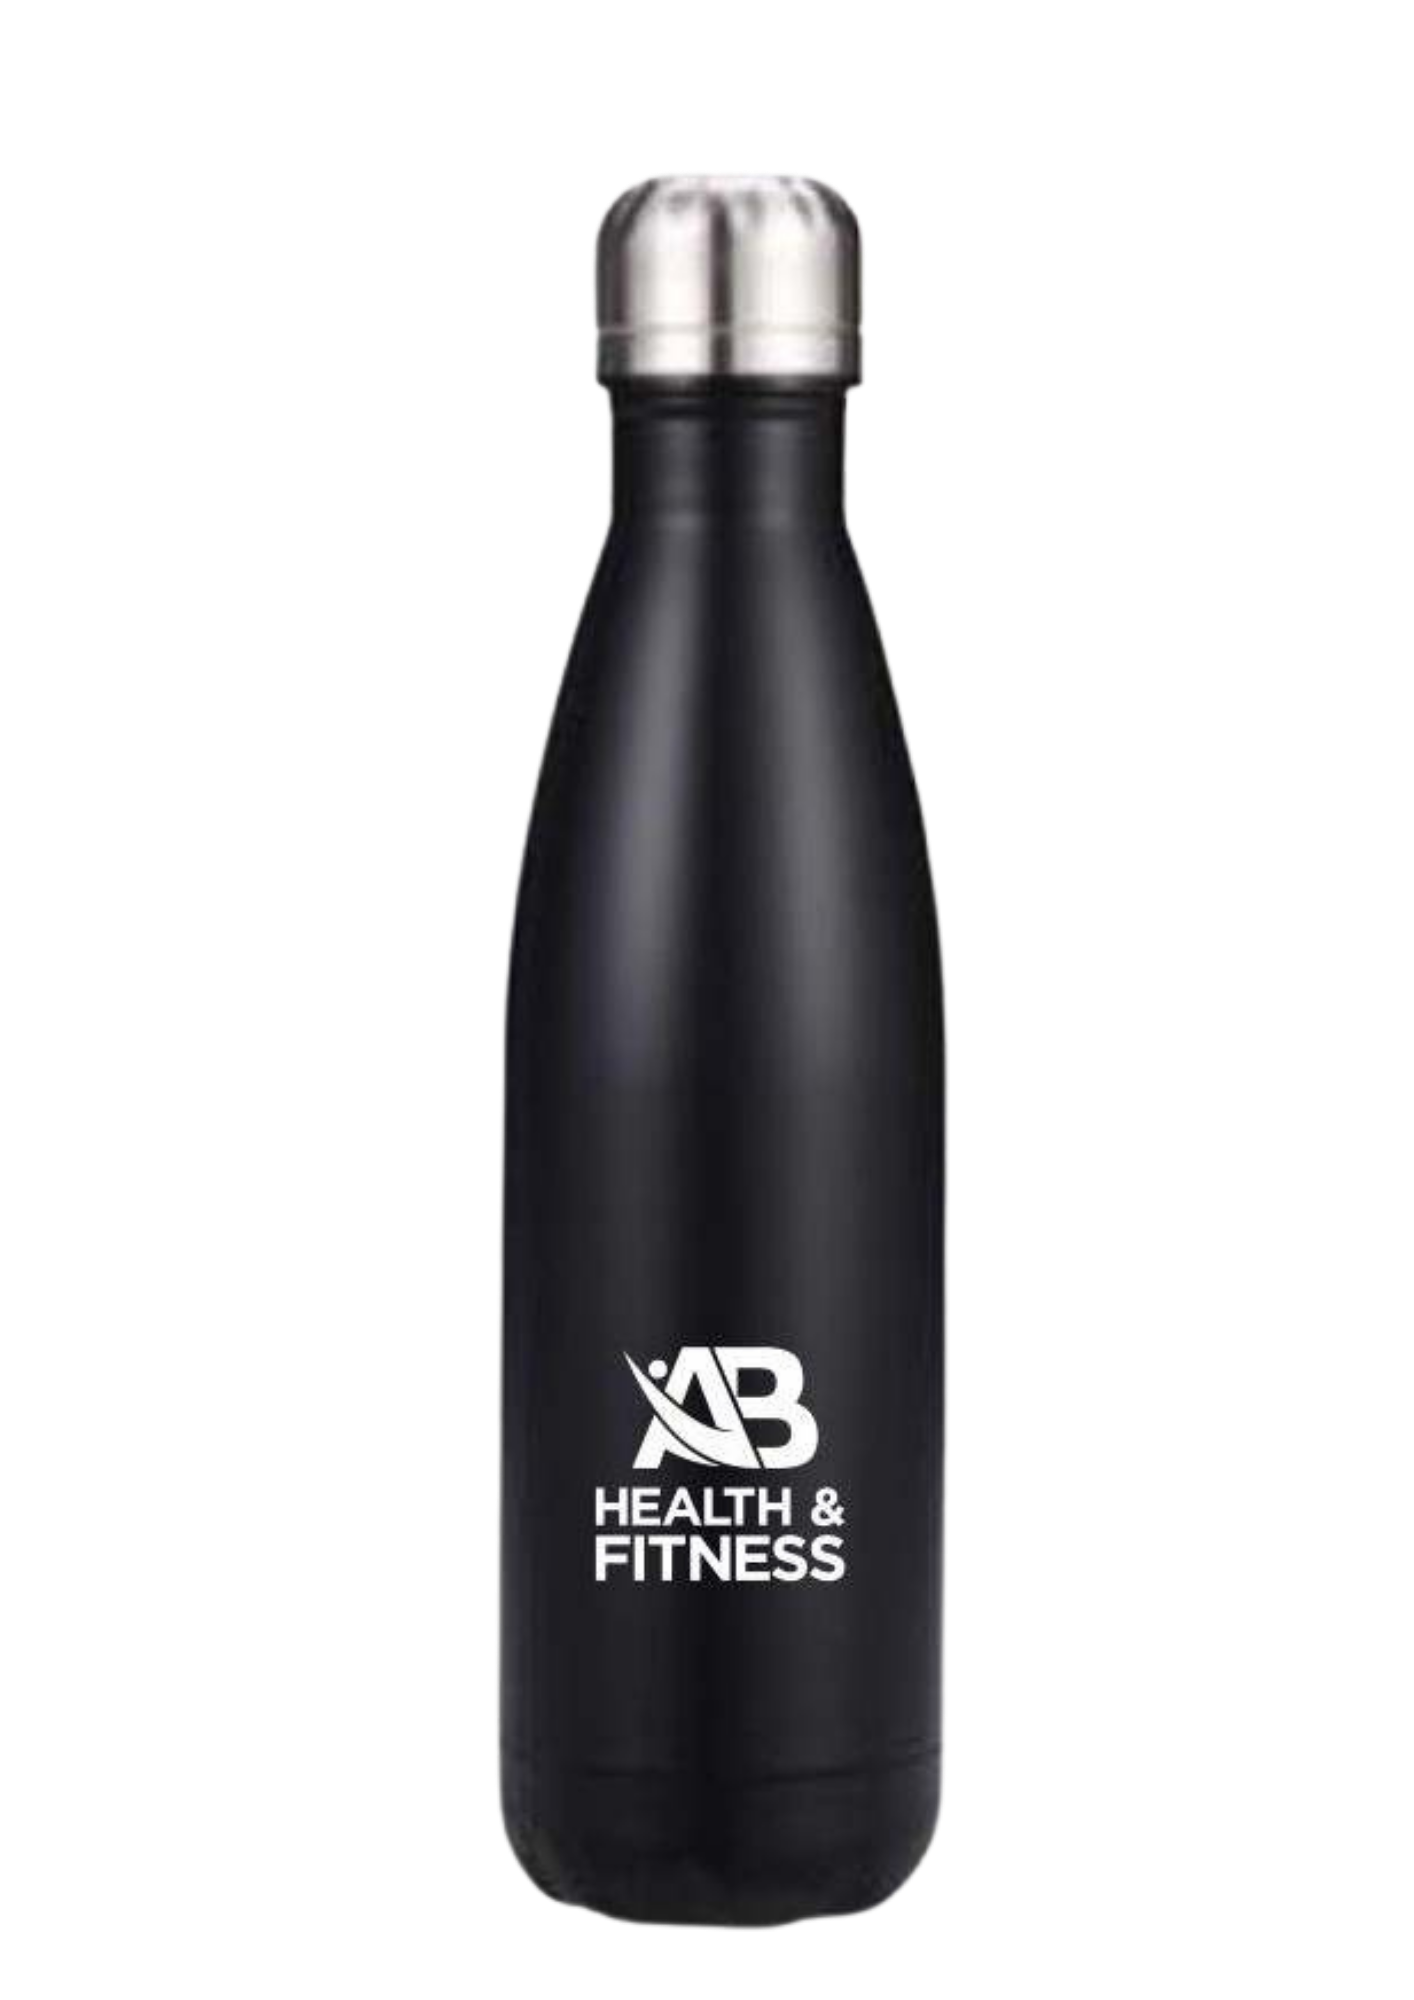 Limited Edition AB Health and Fitness Water Bottles